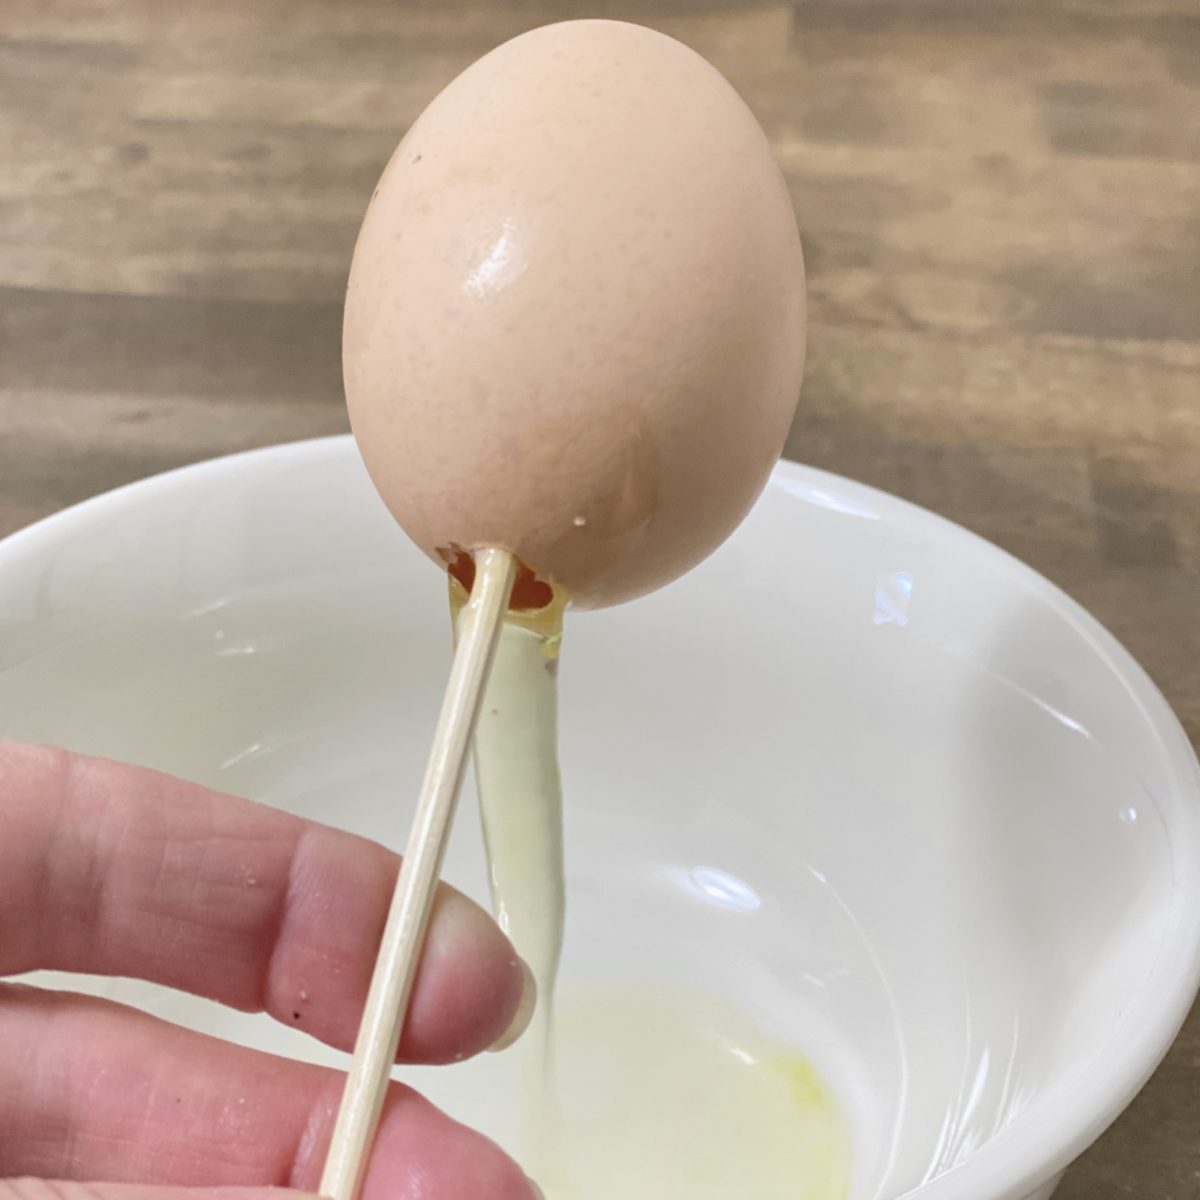 Using a bamboo skewer to drain out the inside of an egg into a bowl to make it hollow.